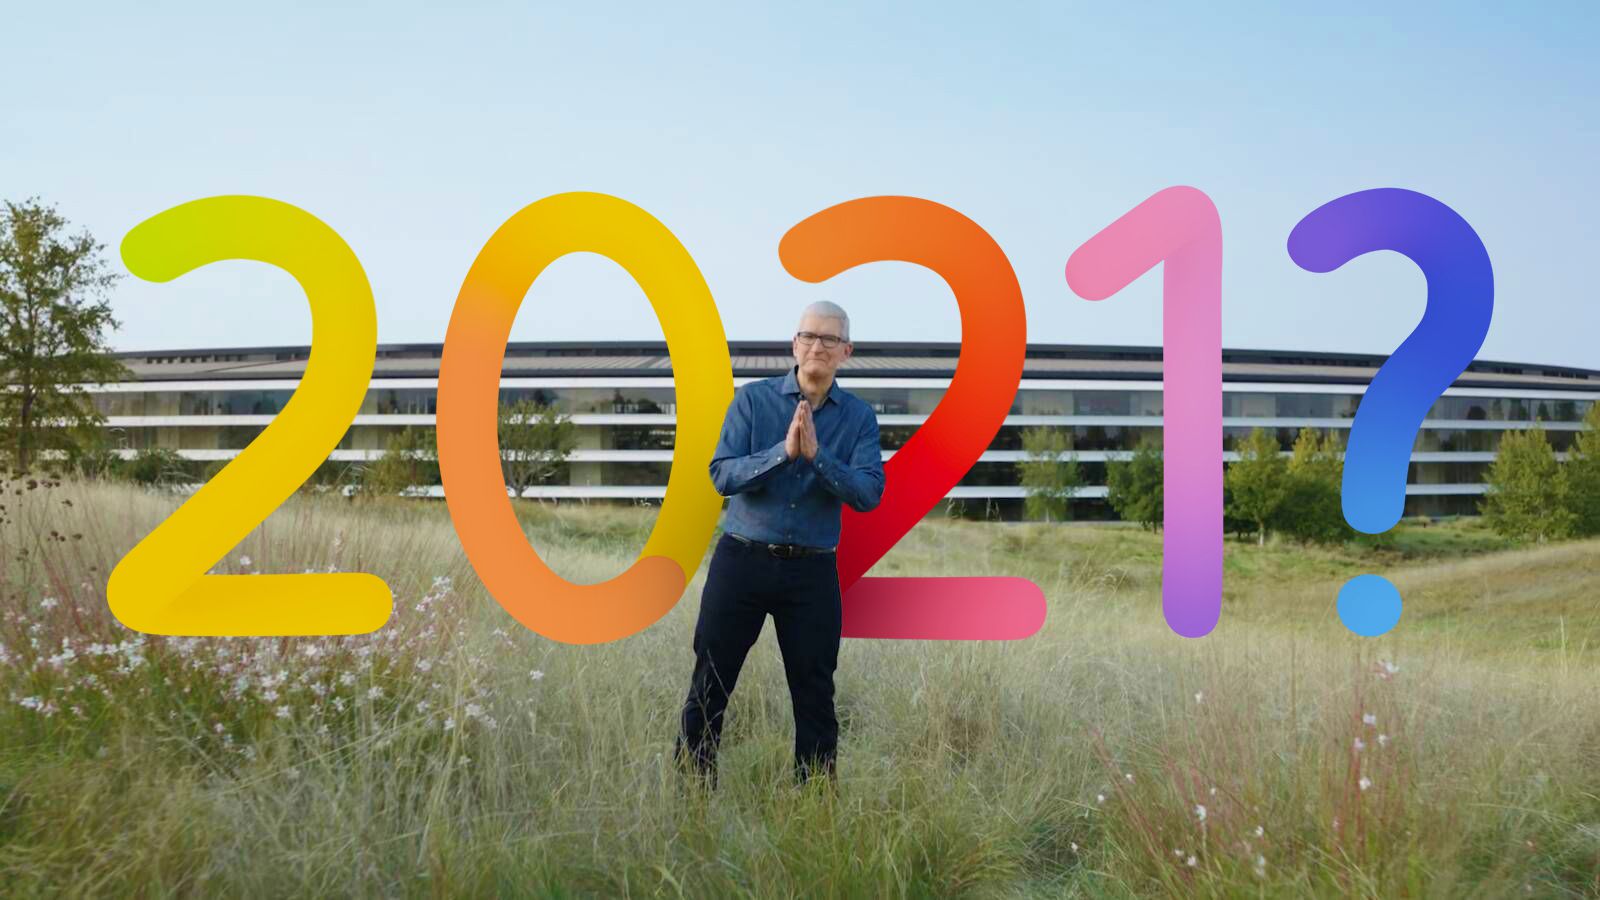 The Top 6 Apple Rumors From All of 2021